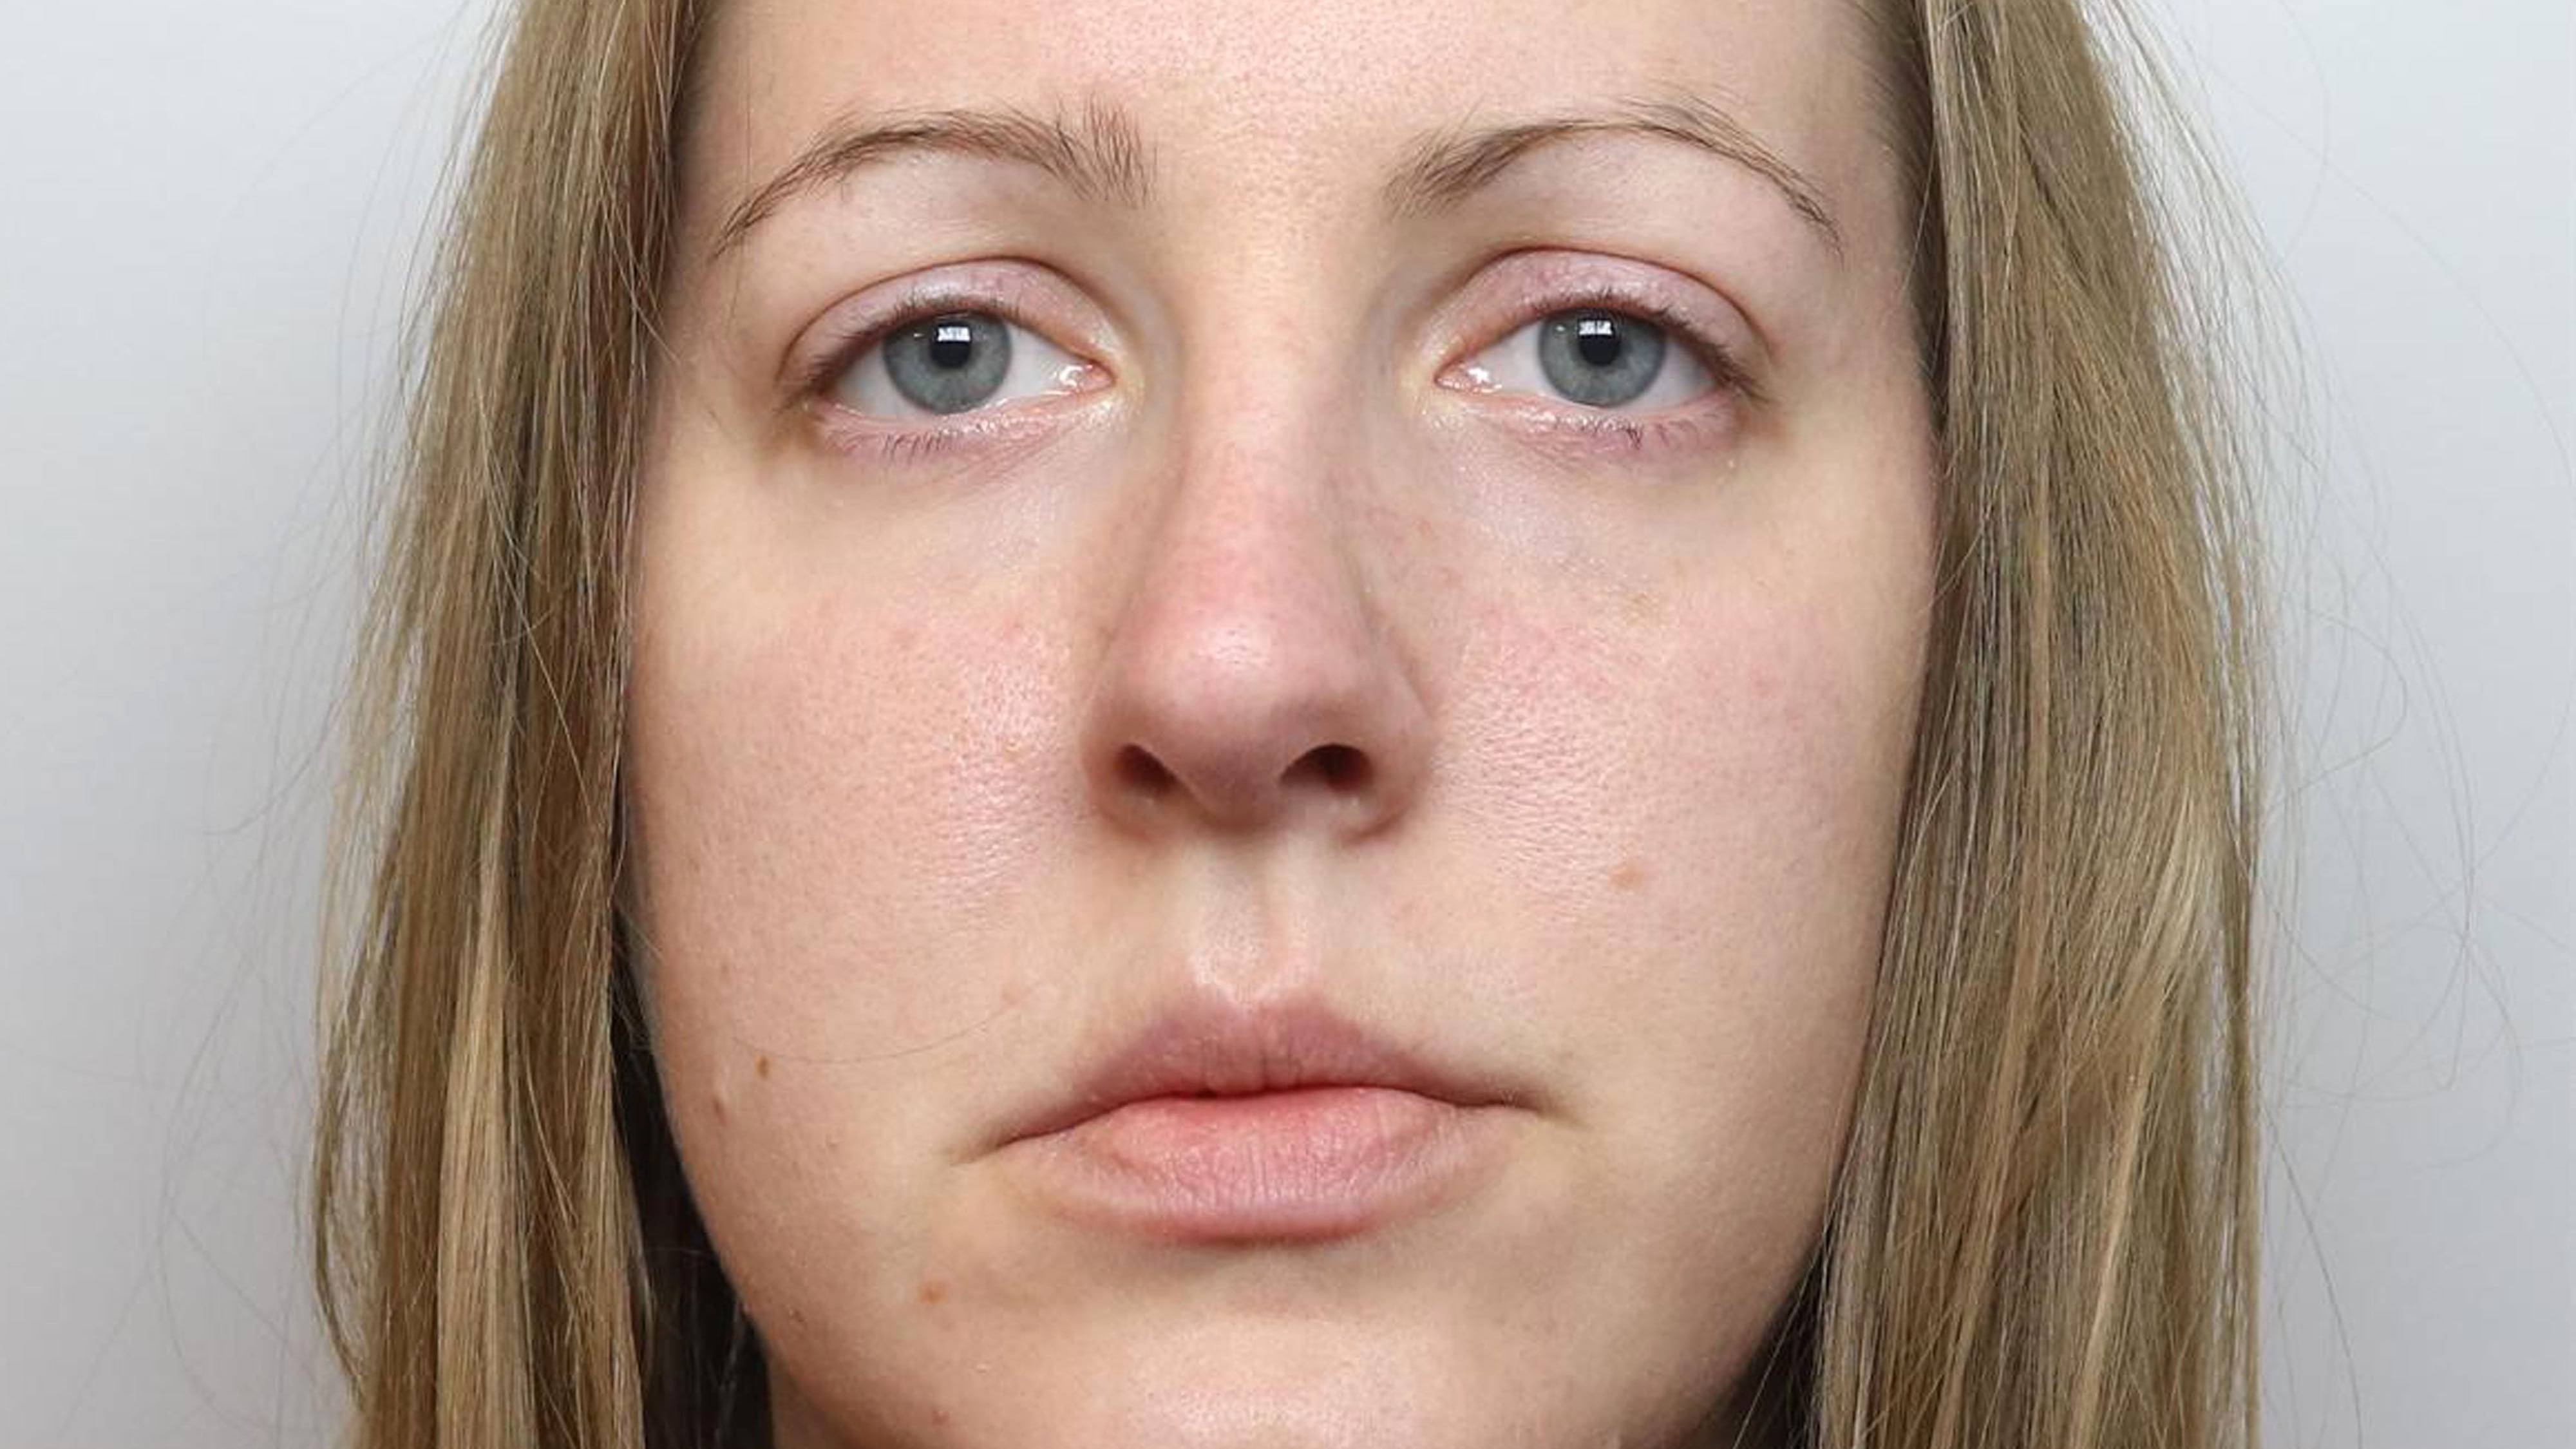 The jury in the retrial of killer nurse Lucy Letby has been sent out to consider its verdict on an allegation that she attempted to murder a baby girl in her care